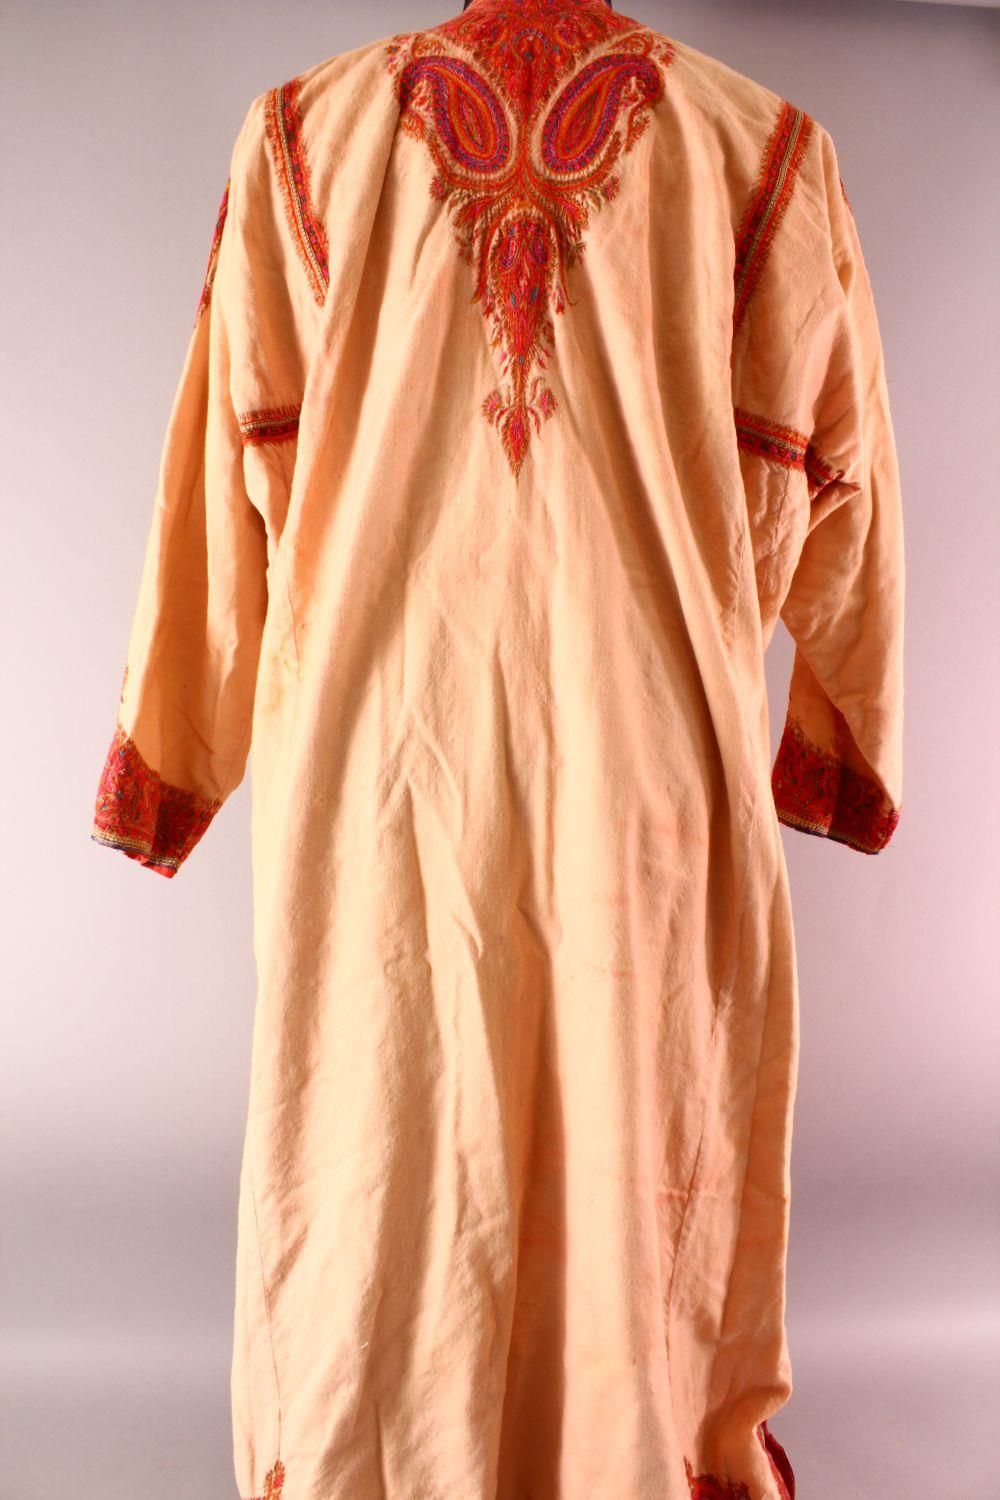 A FINE INDIAN KASHMIRI EMBROIDERED ROBE. - Image 4 of 7